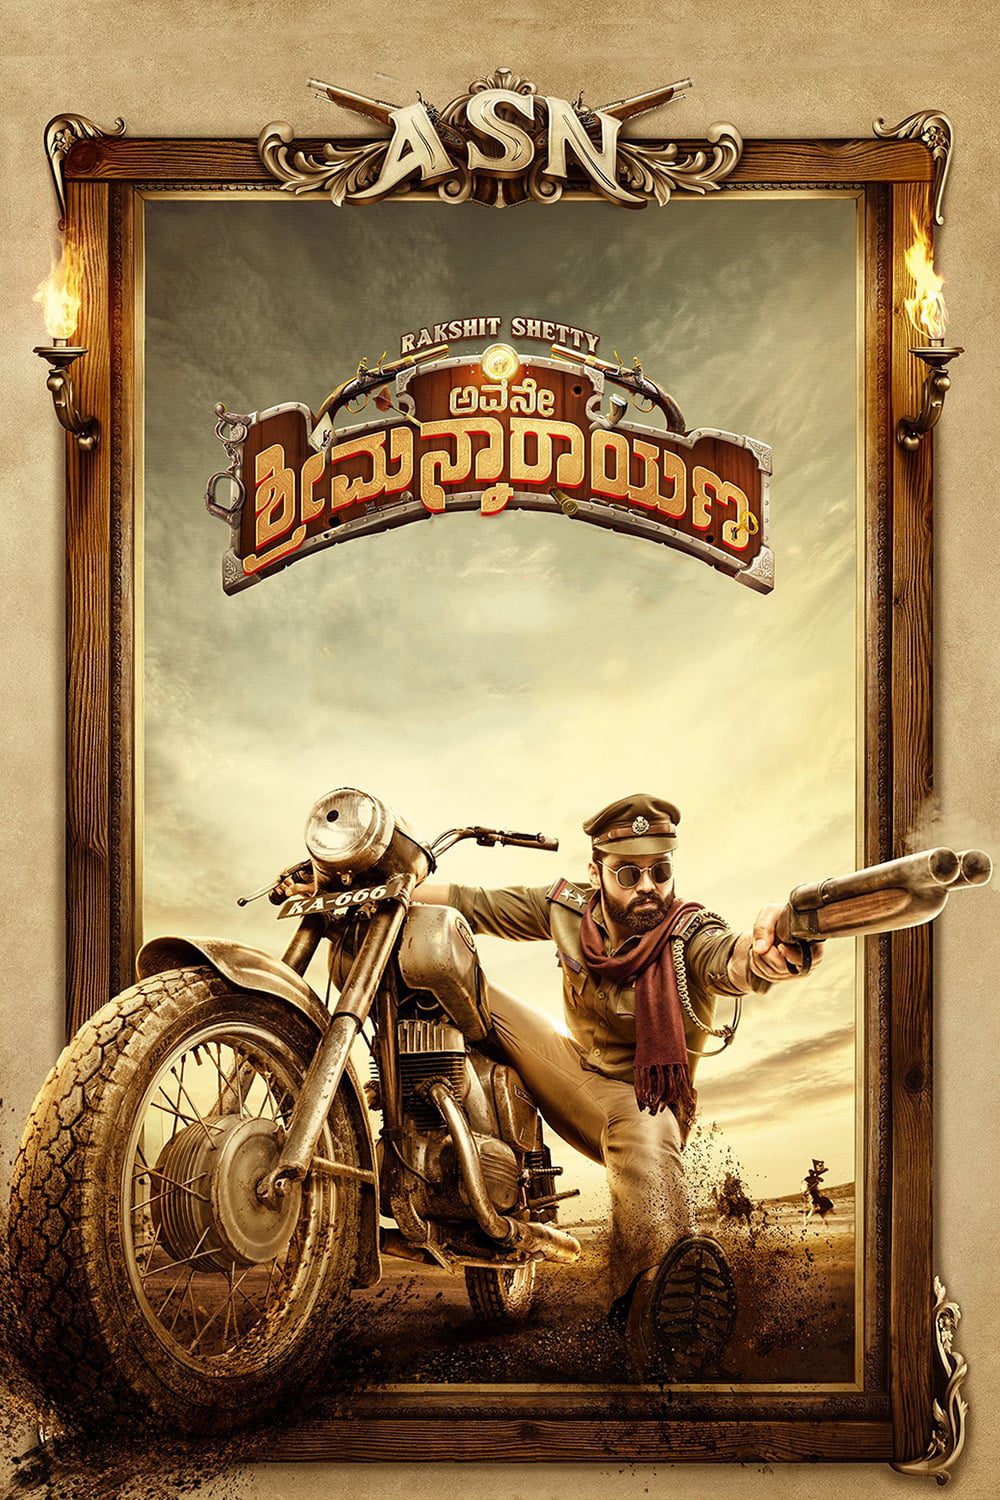 Poster for the movie "Avane Srimannarayana"